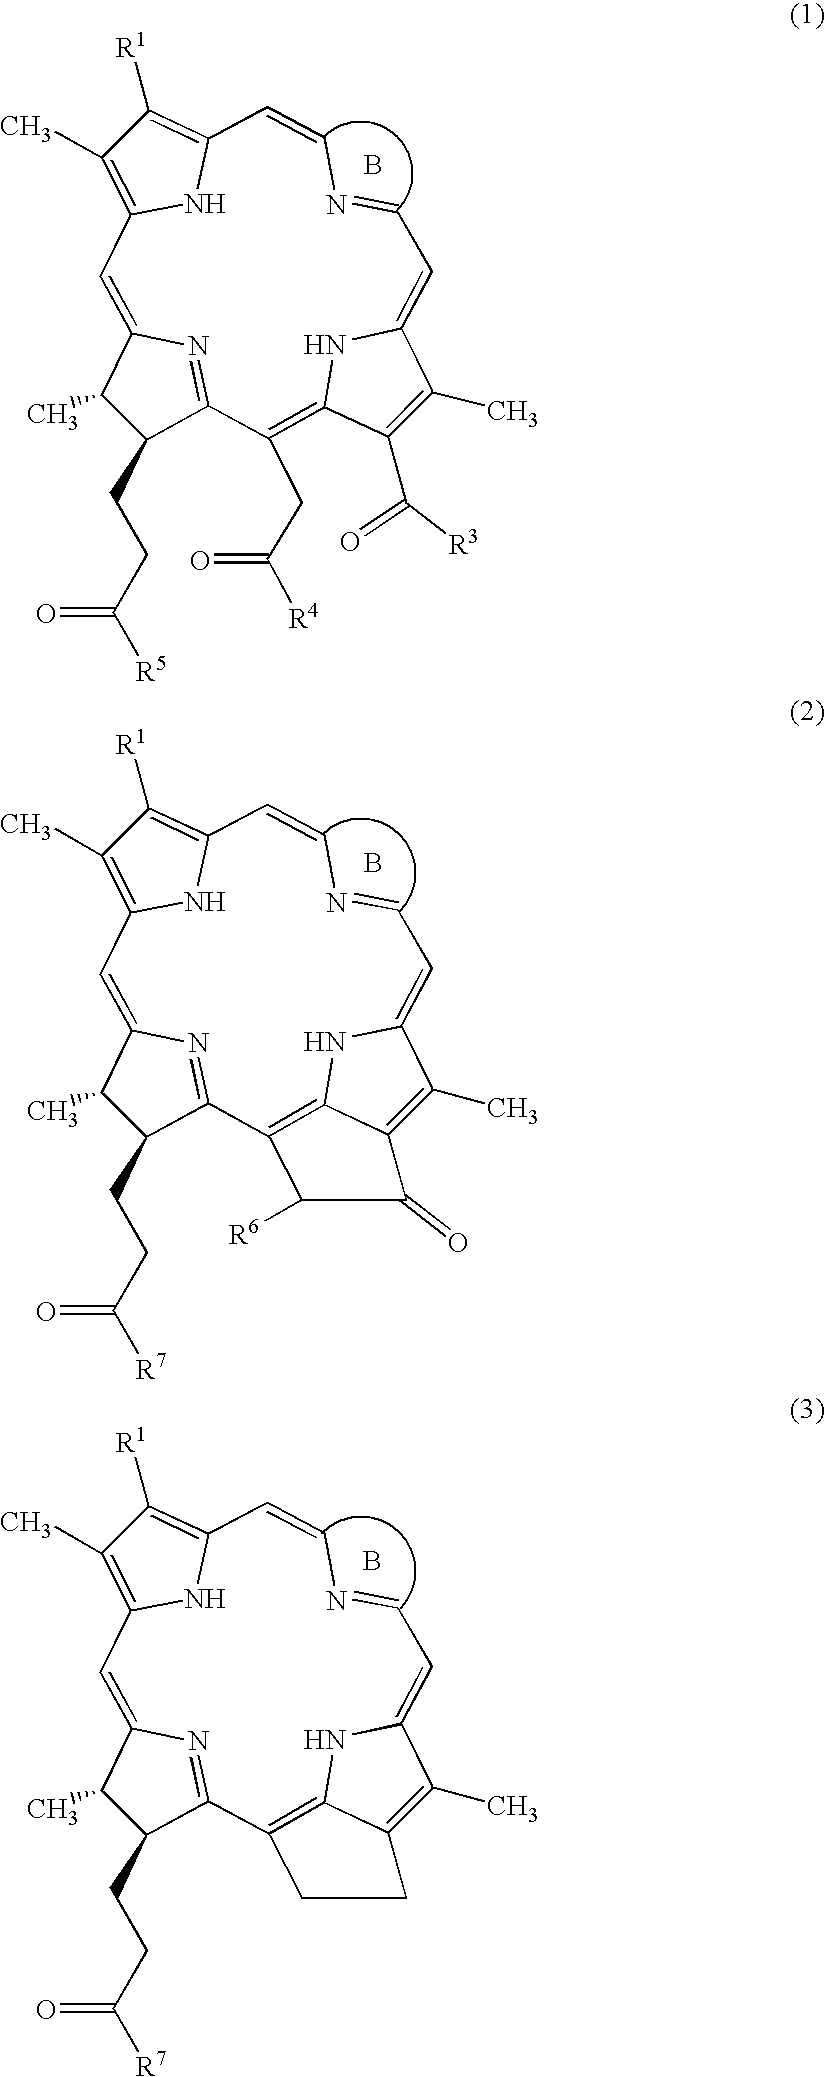 Water-soluble mono-PEGylated tetrapyrrole derivatives for photodynamic therapy and method of production